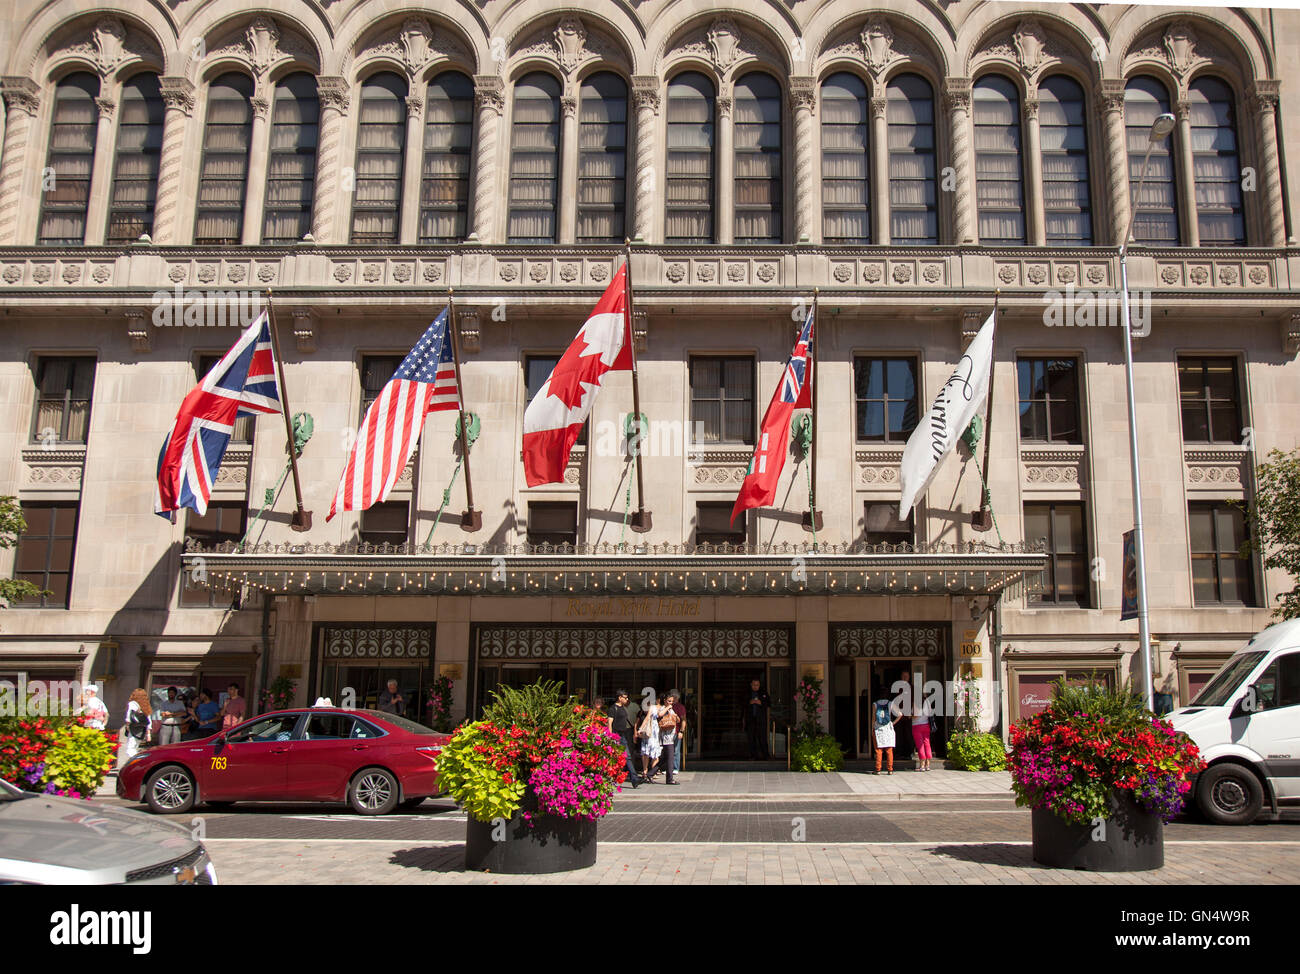 TORONTO - AUGUST 8, 2016: The Fairmont Royal York in Toronto is a luxury hotel. Stock Photo